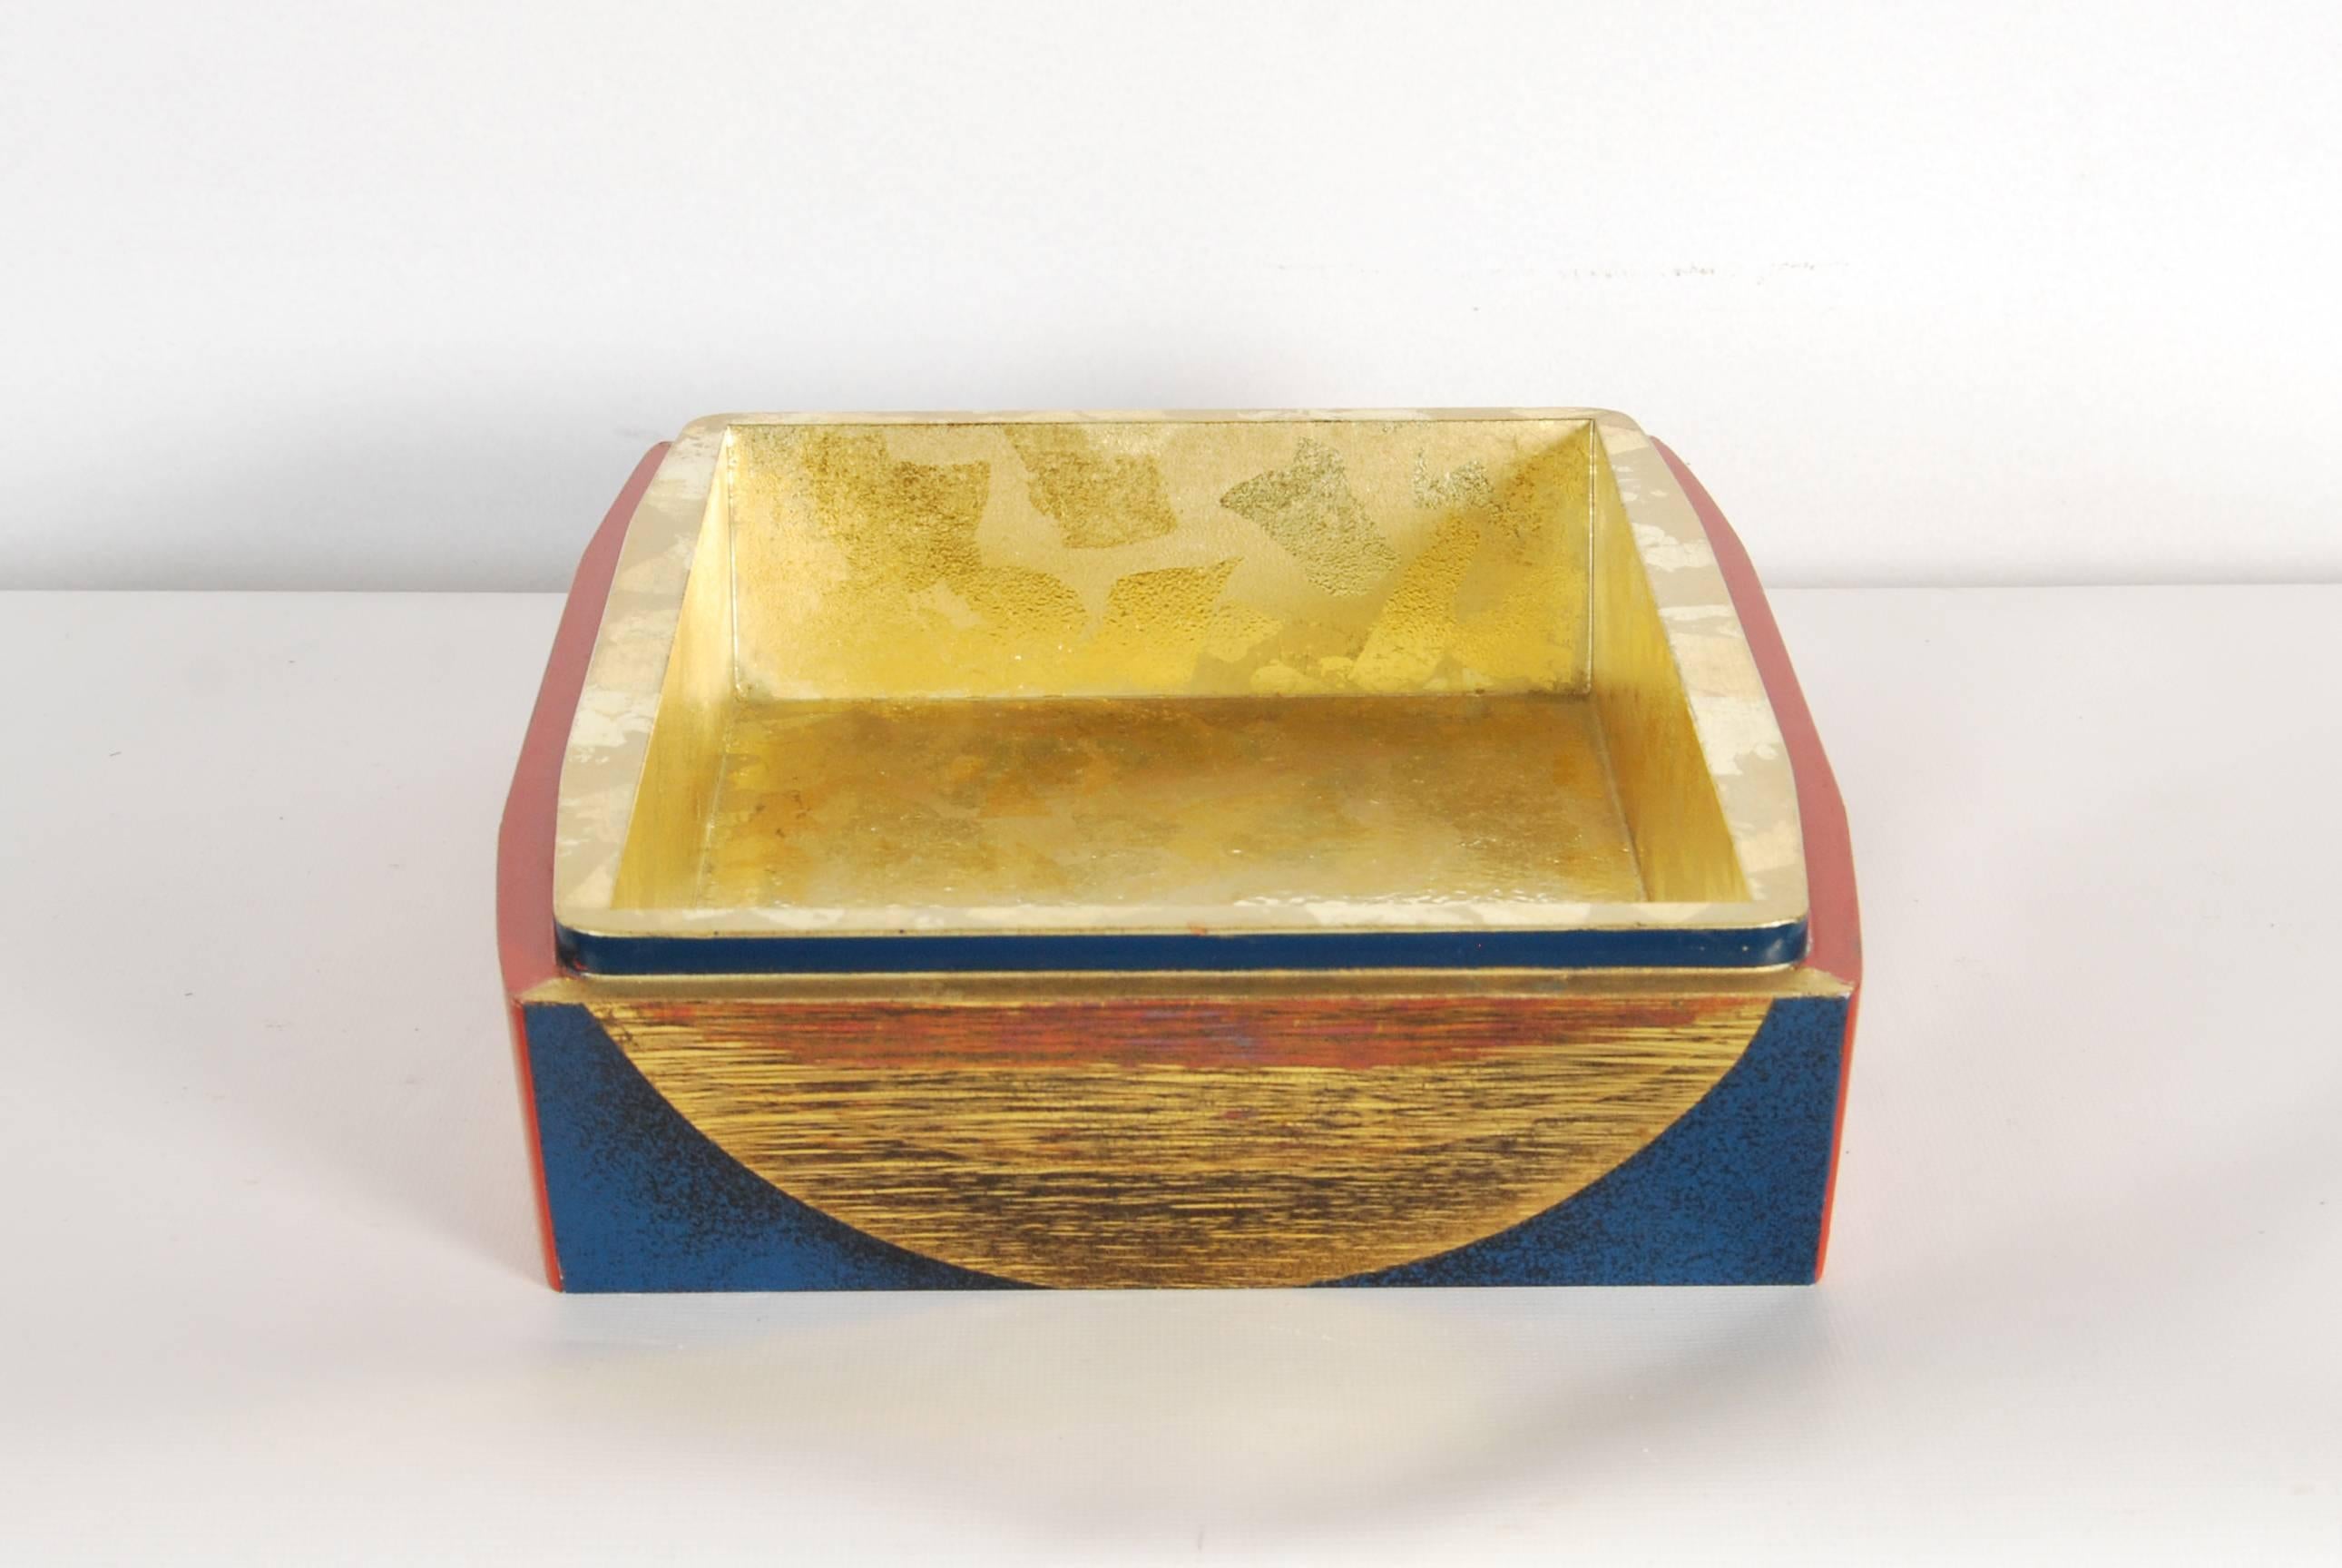 Mother-of-Pearl Contemporary Japanese Lacquer Box by Yoshifumi Takeuchi